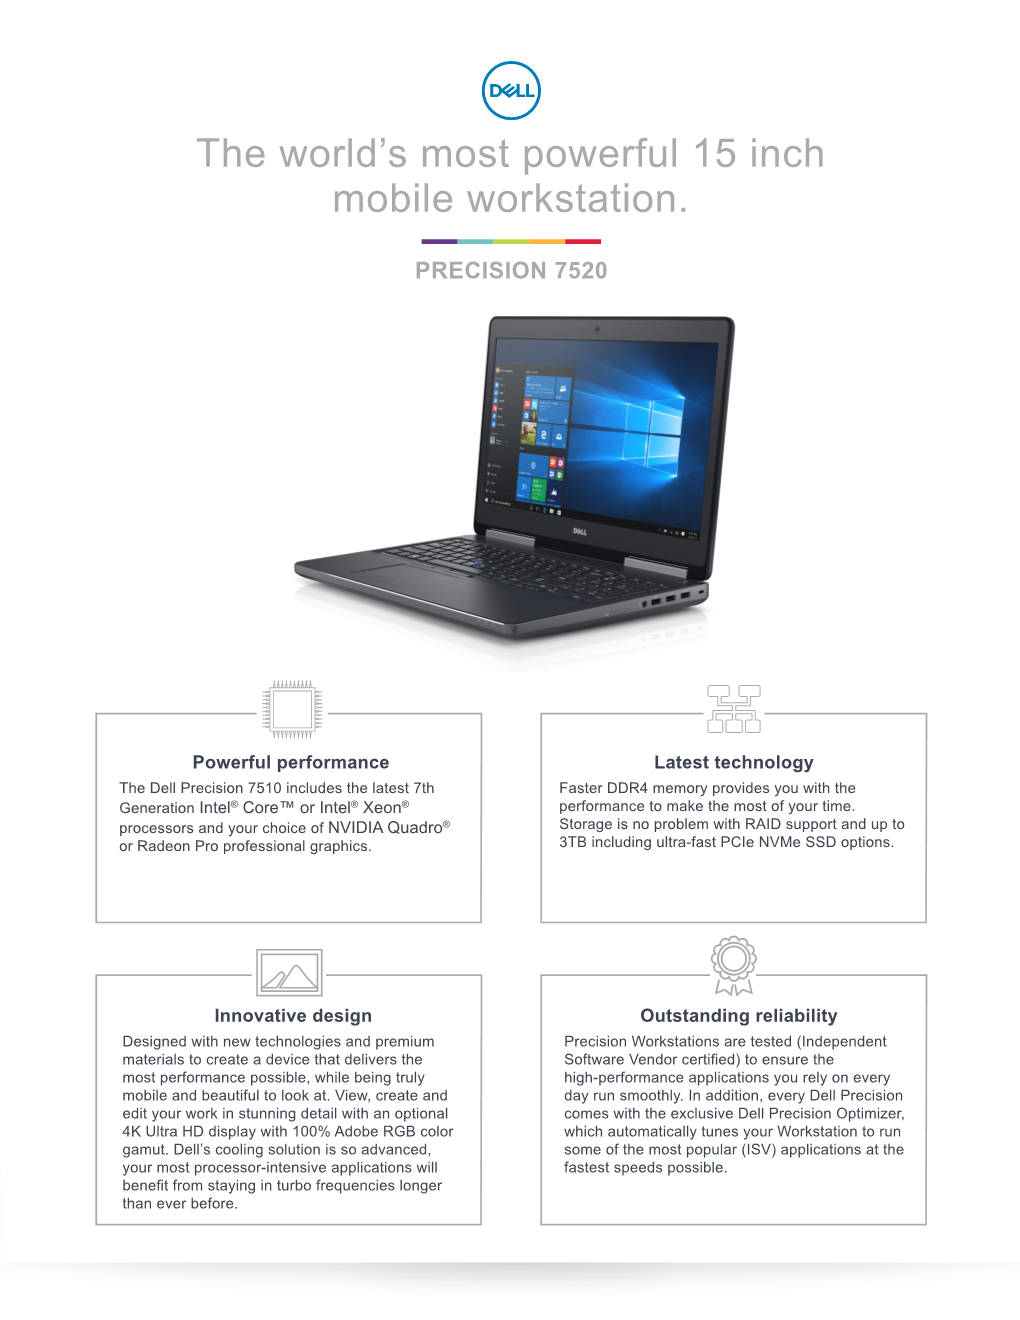 The World's Most Powerful 15 Inch Mobile Workstation